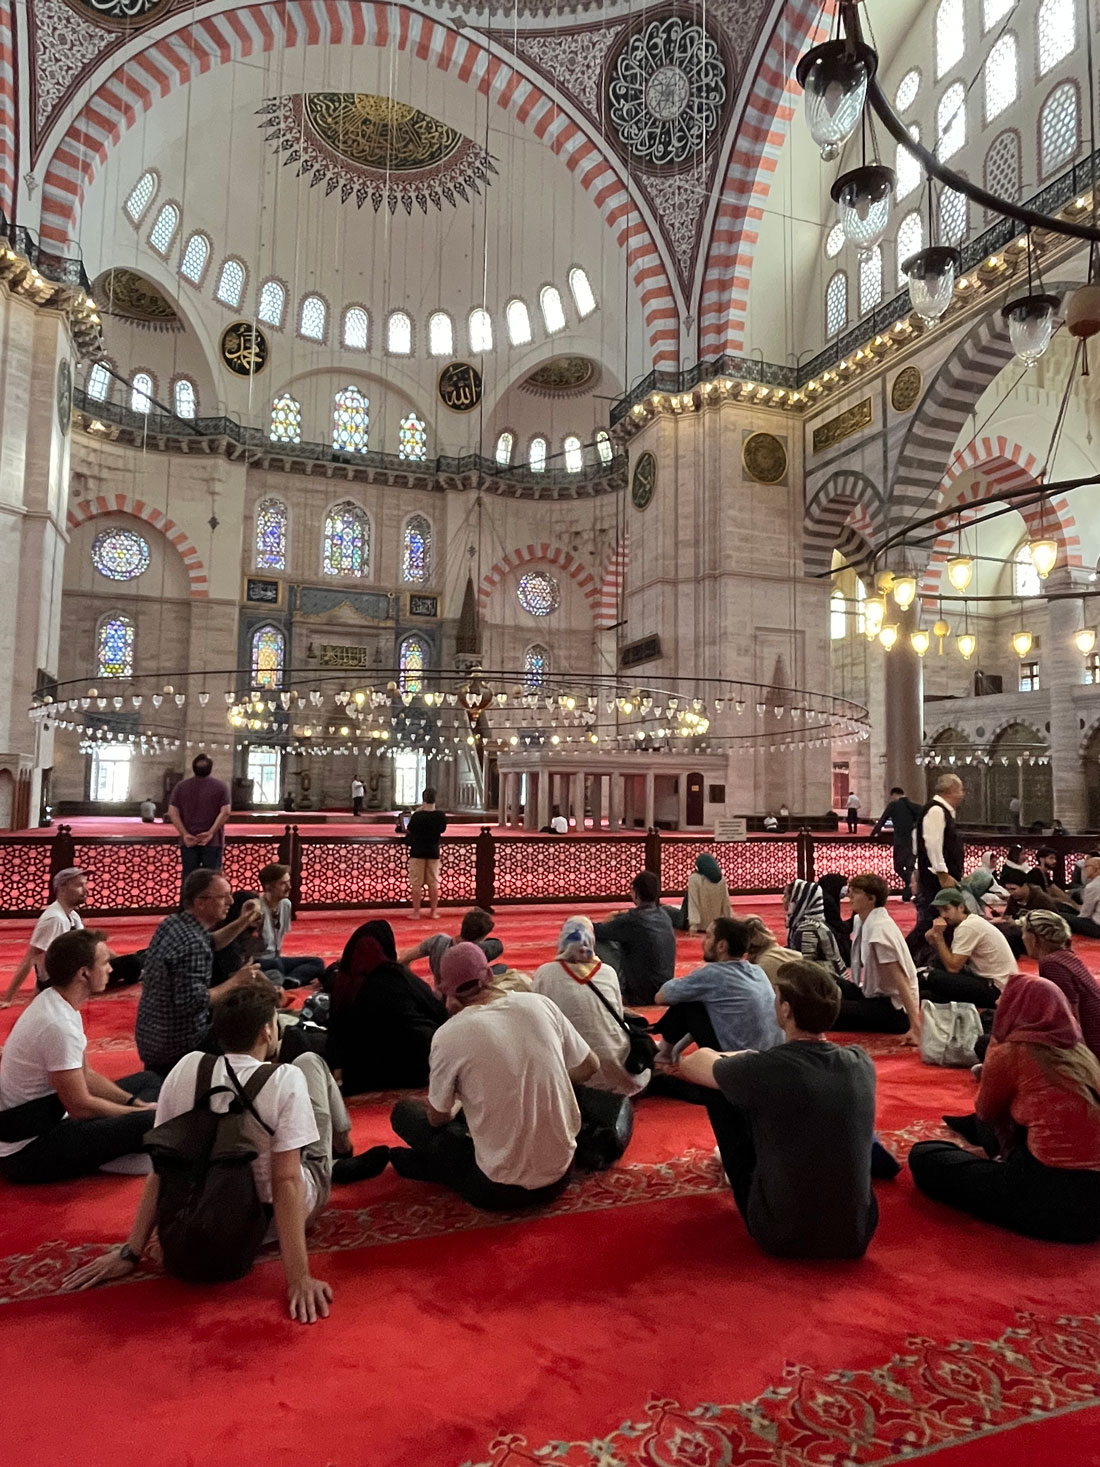 photograph of people seated on the floor of a mosque in Istanbul, Turkey, listening to a professor speak